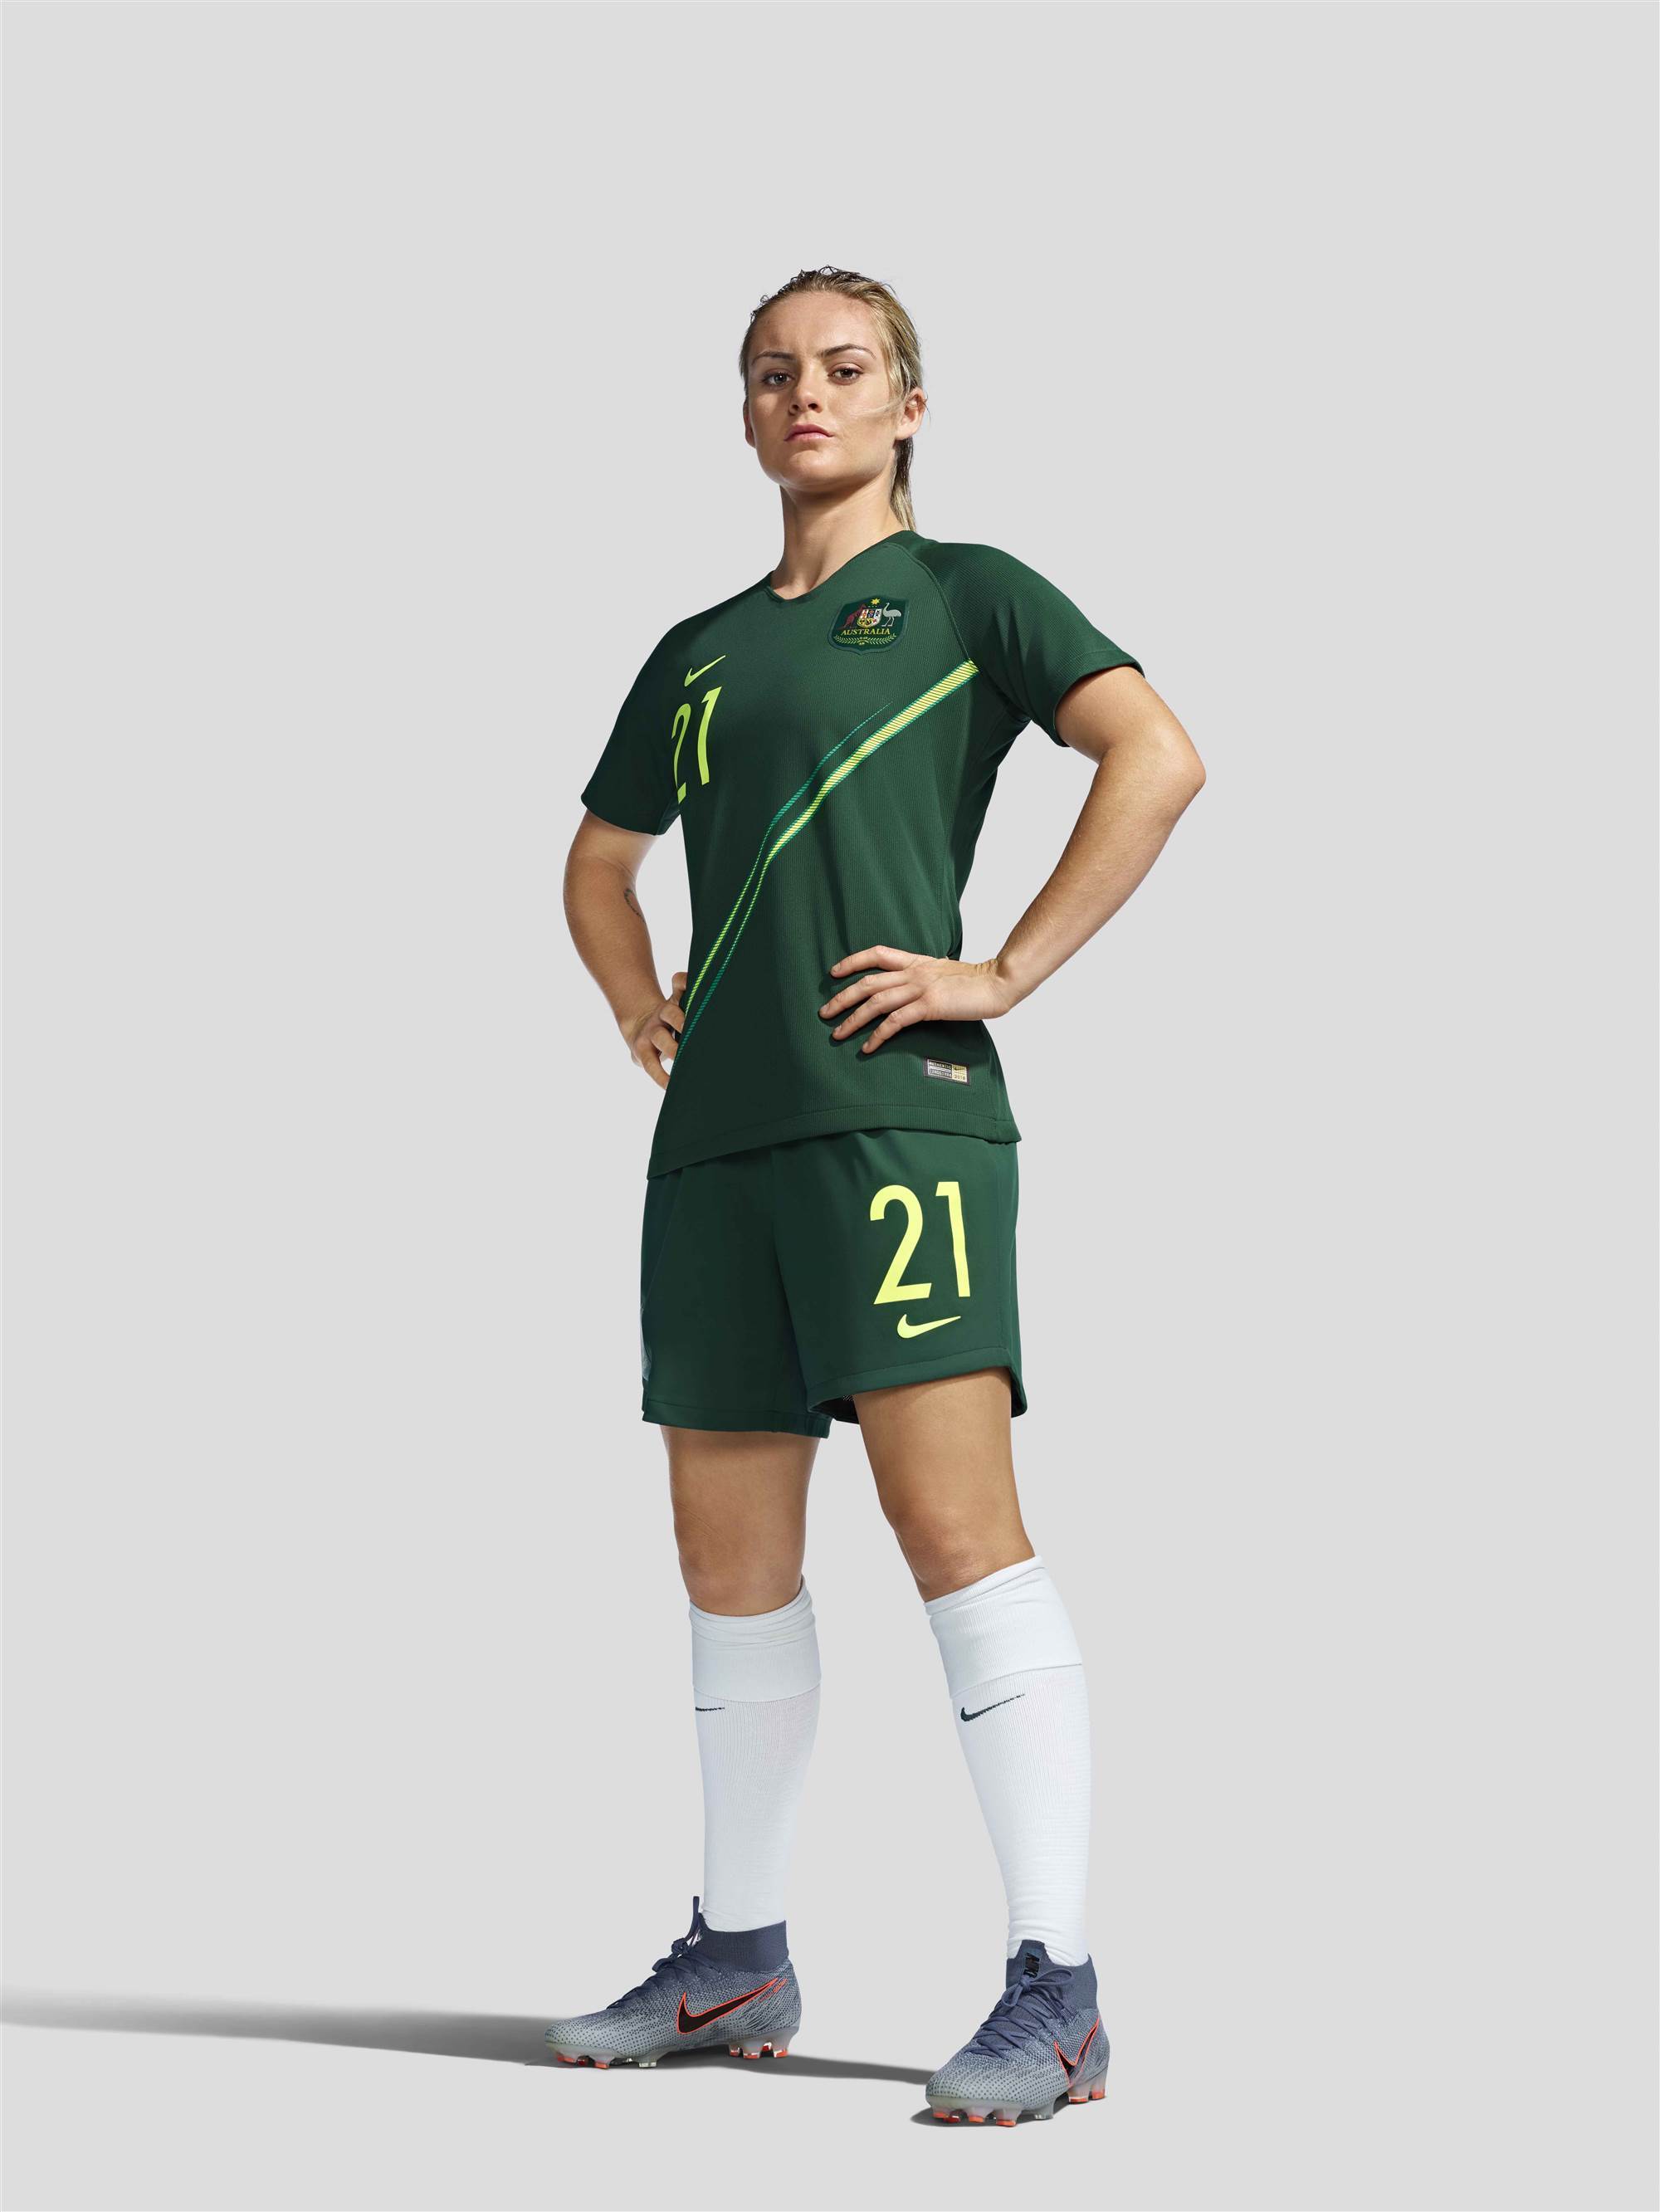 Revealed! The new Matildas kit pic special The Women's Game